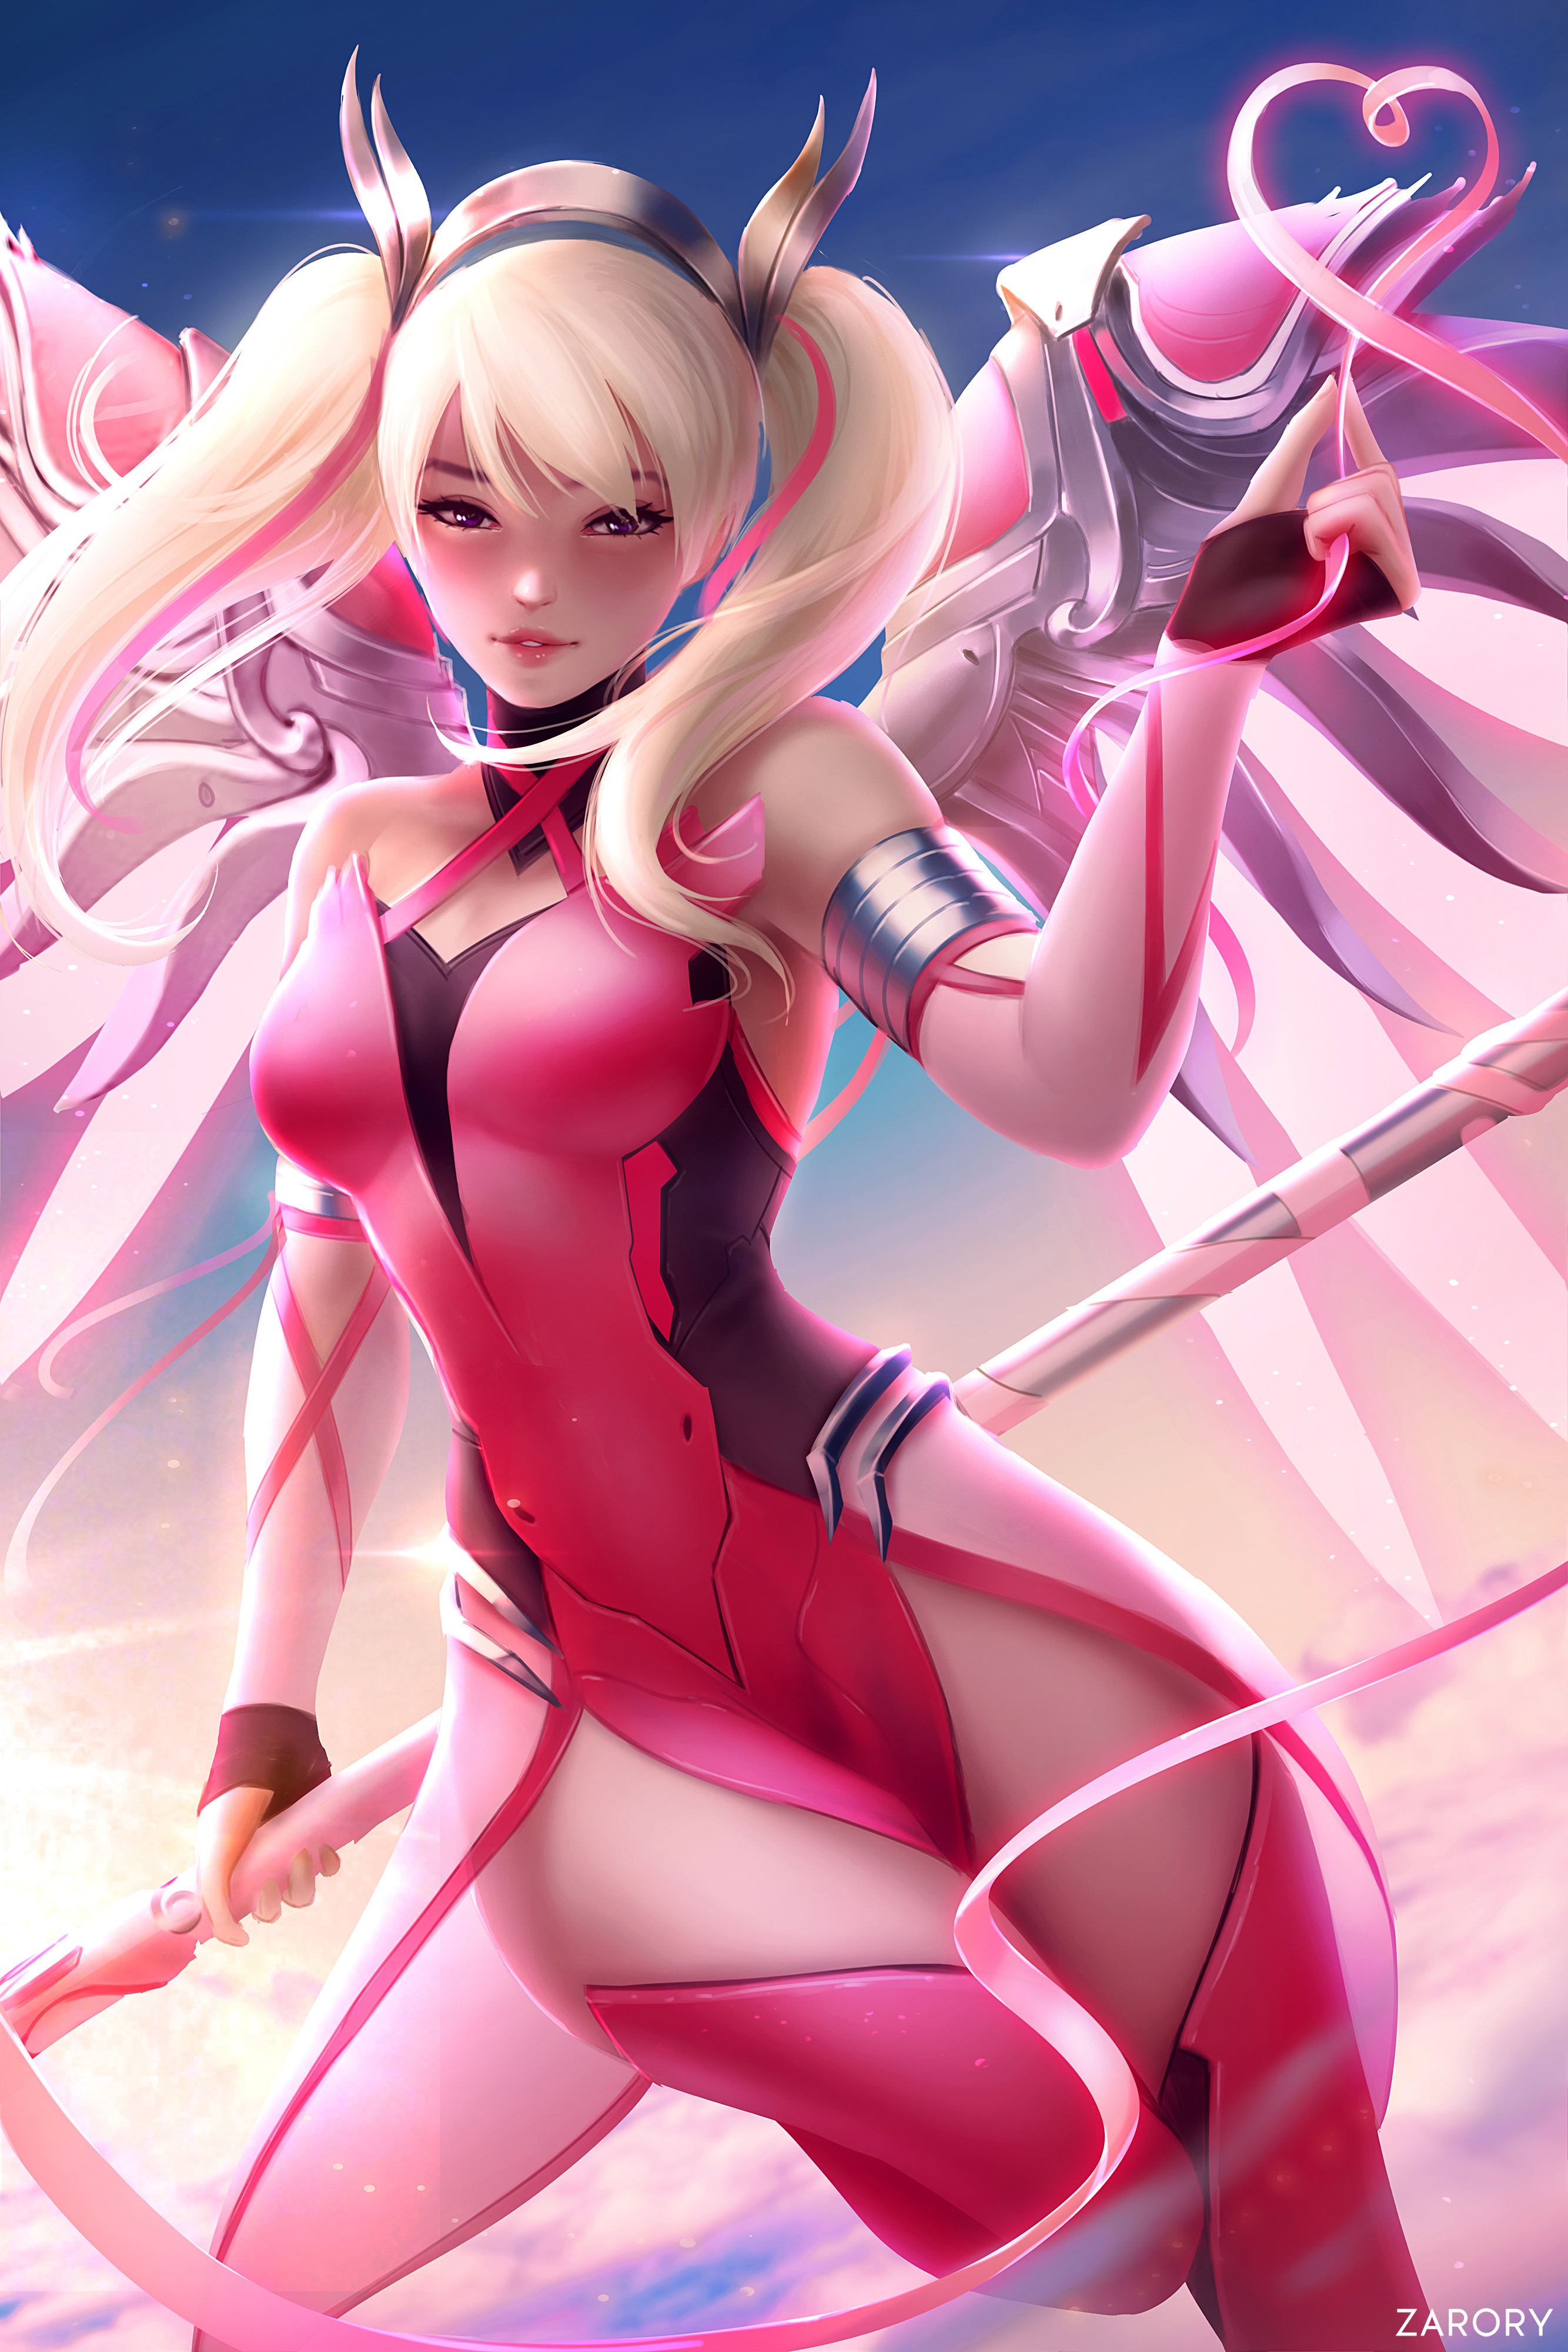 Mercy Overwatch Overwatch Video Games Video Game Girls Video Game Characters Fantasy Girl Looking At 2667x4000